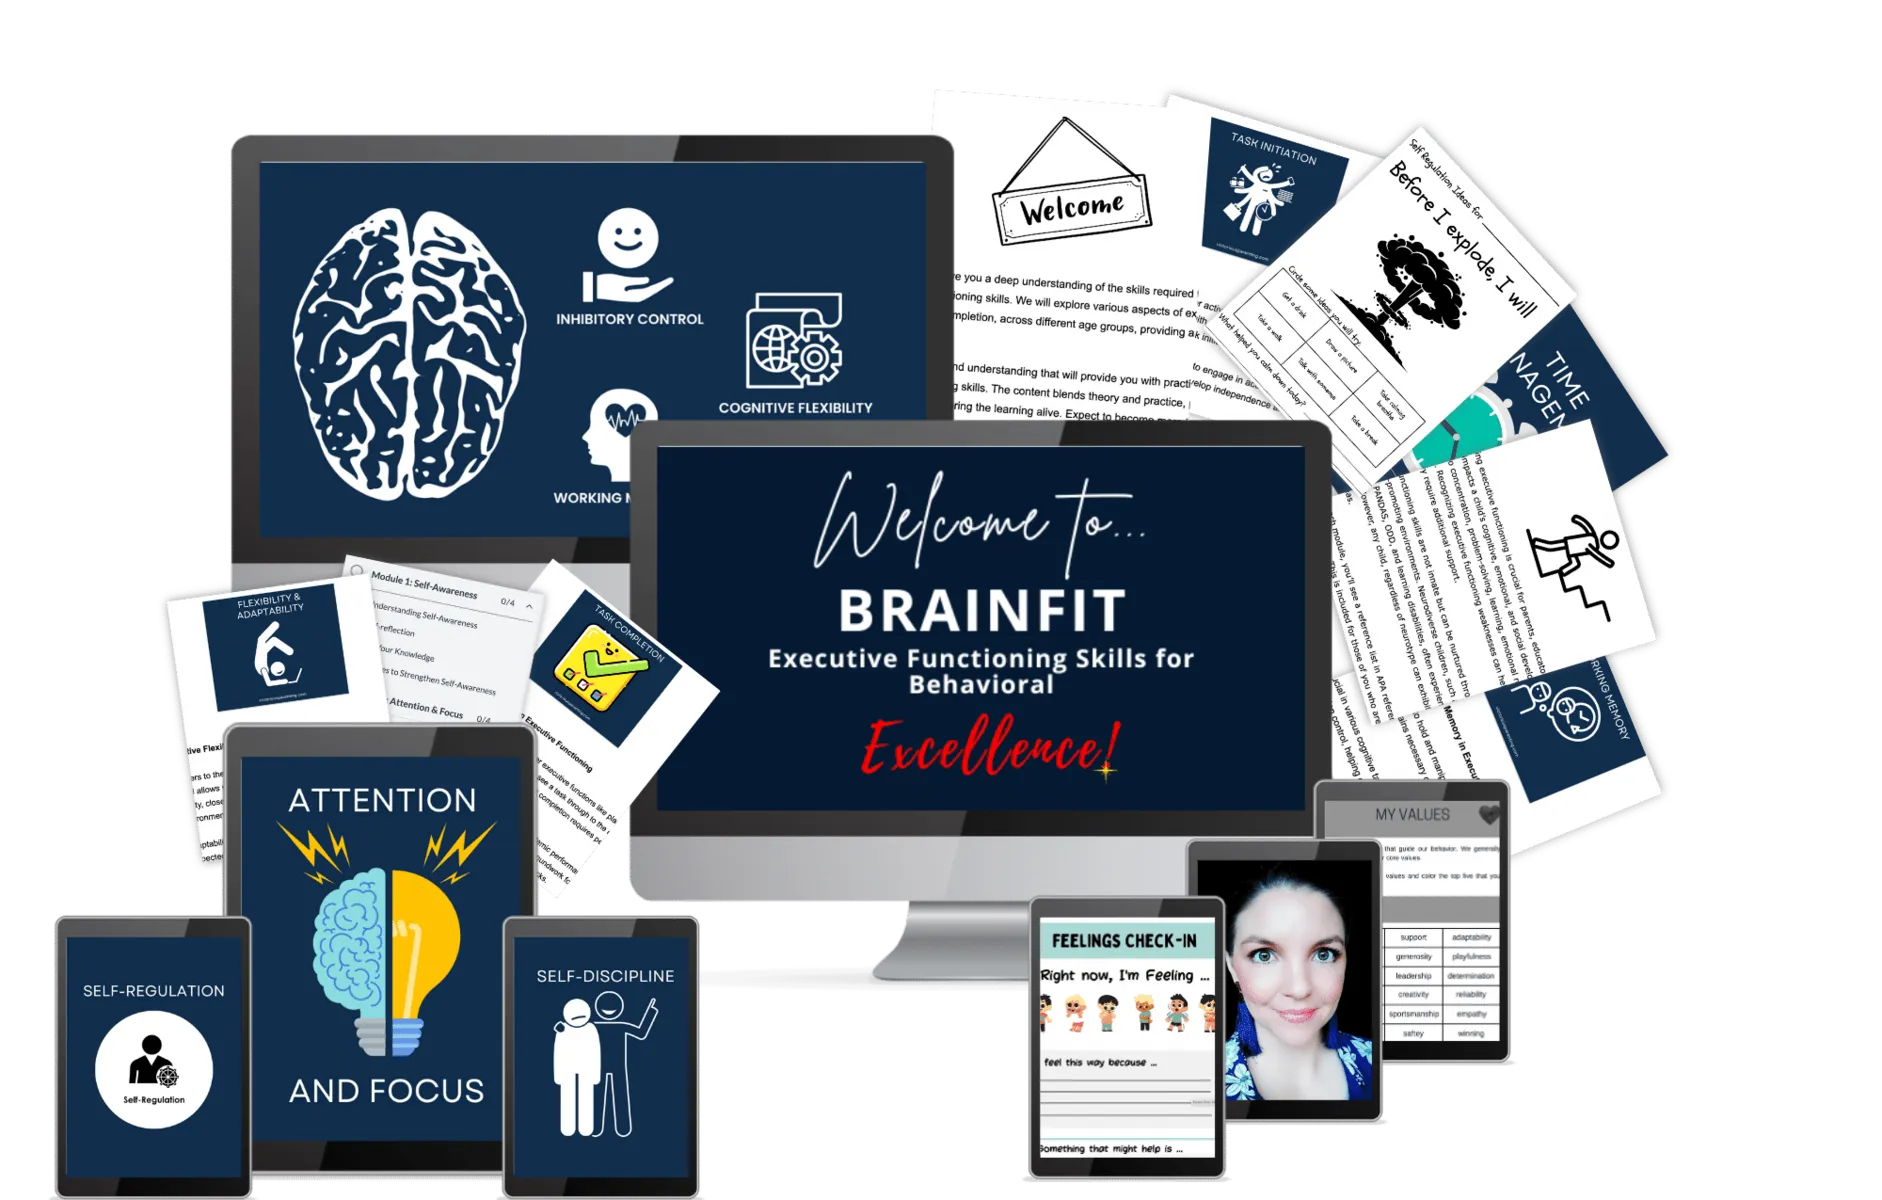 BrainFit - Executive Functioning Skills for Behavioral Excellence by Arabella Hille, Victorious Parenting